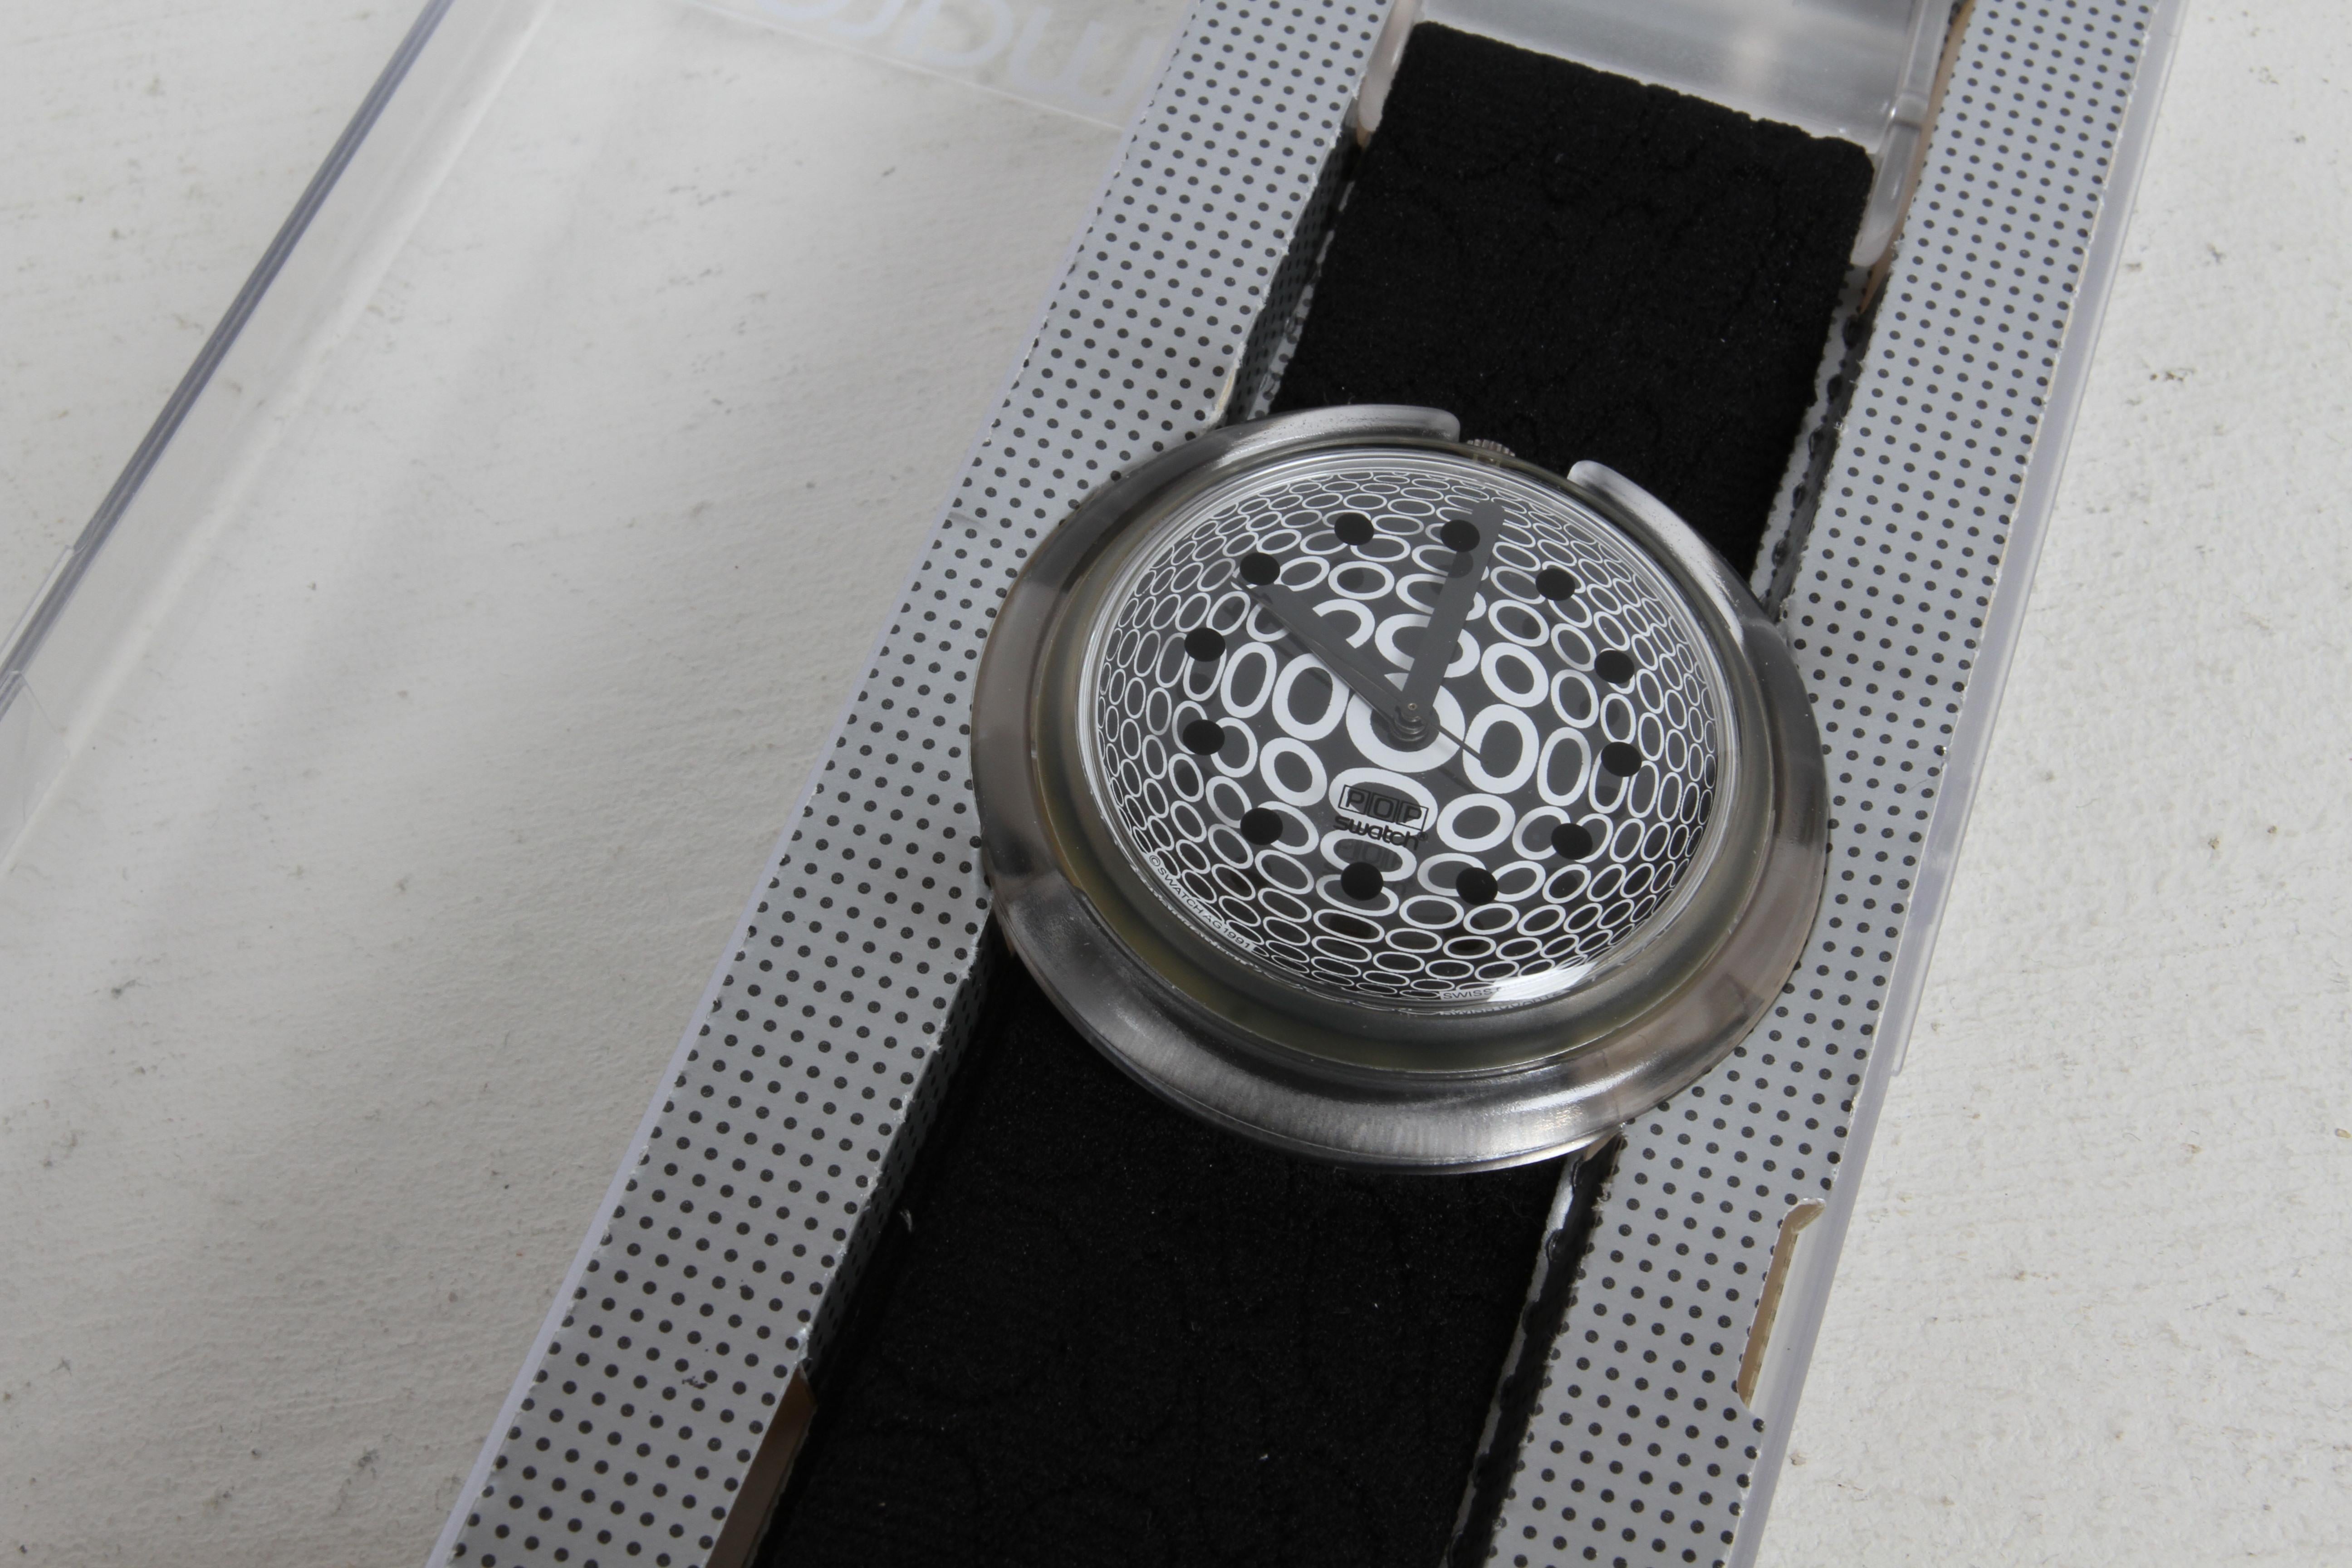 1992 Vintage POP Swatch Watch Special Dots - Op Art - Designed by Vasarely - NOS For Sale 1